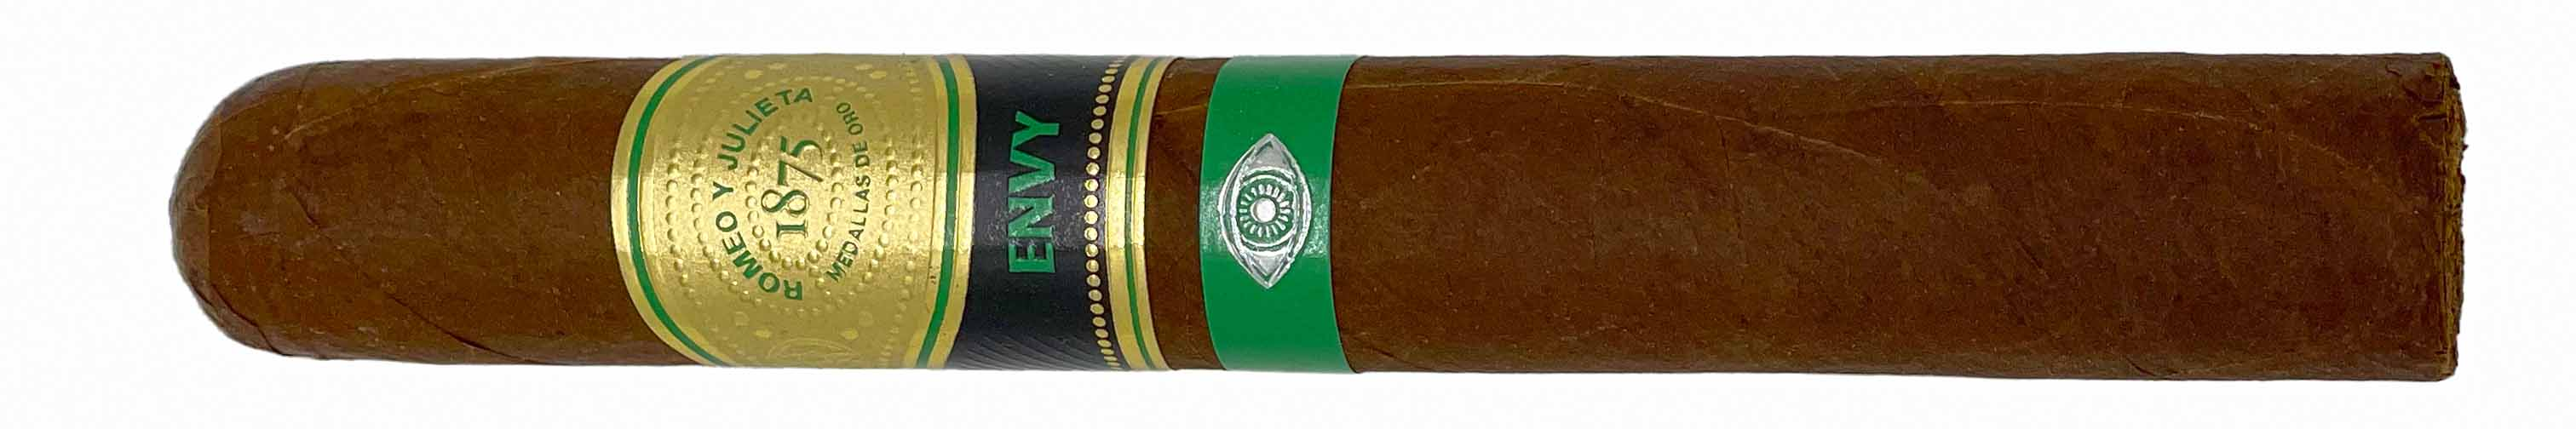 Plasencia Cigars S.A's Envy Amulet - Limited Edition Cigars